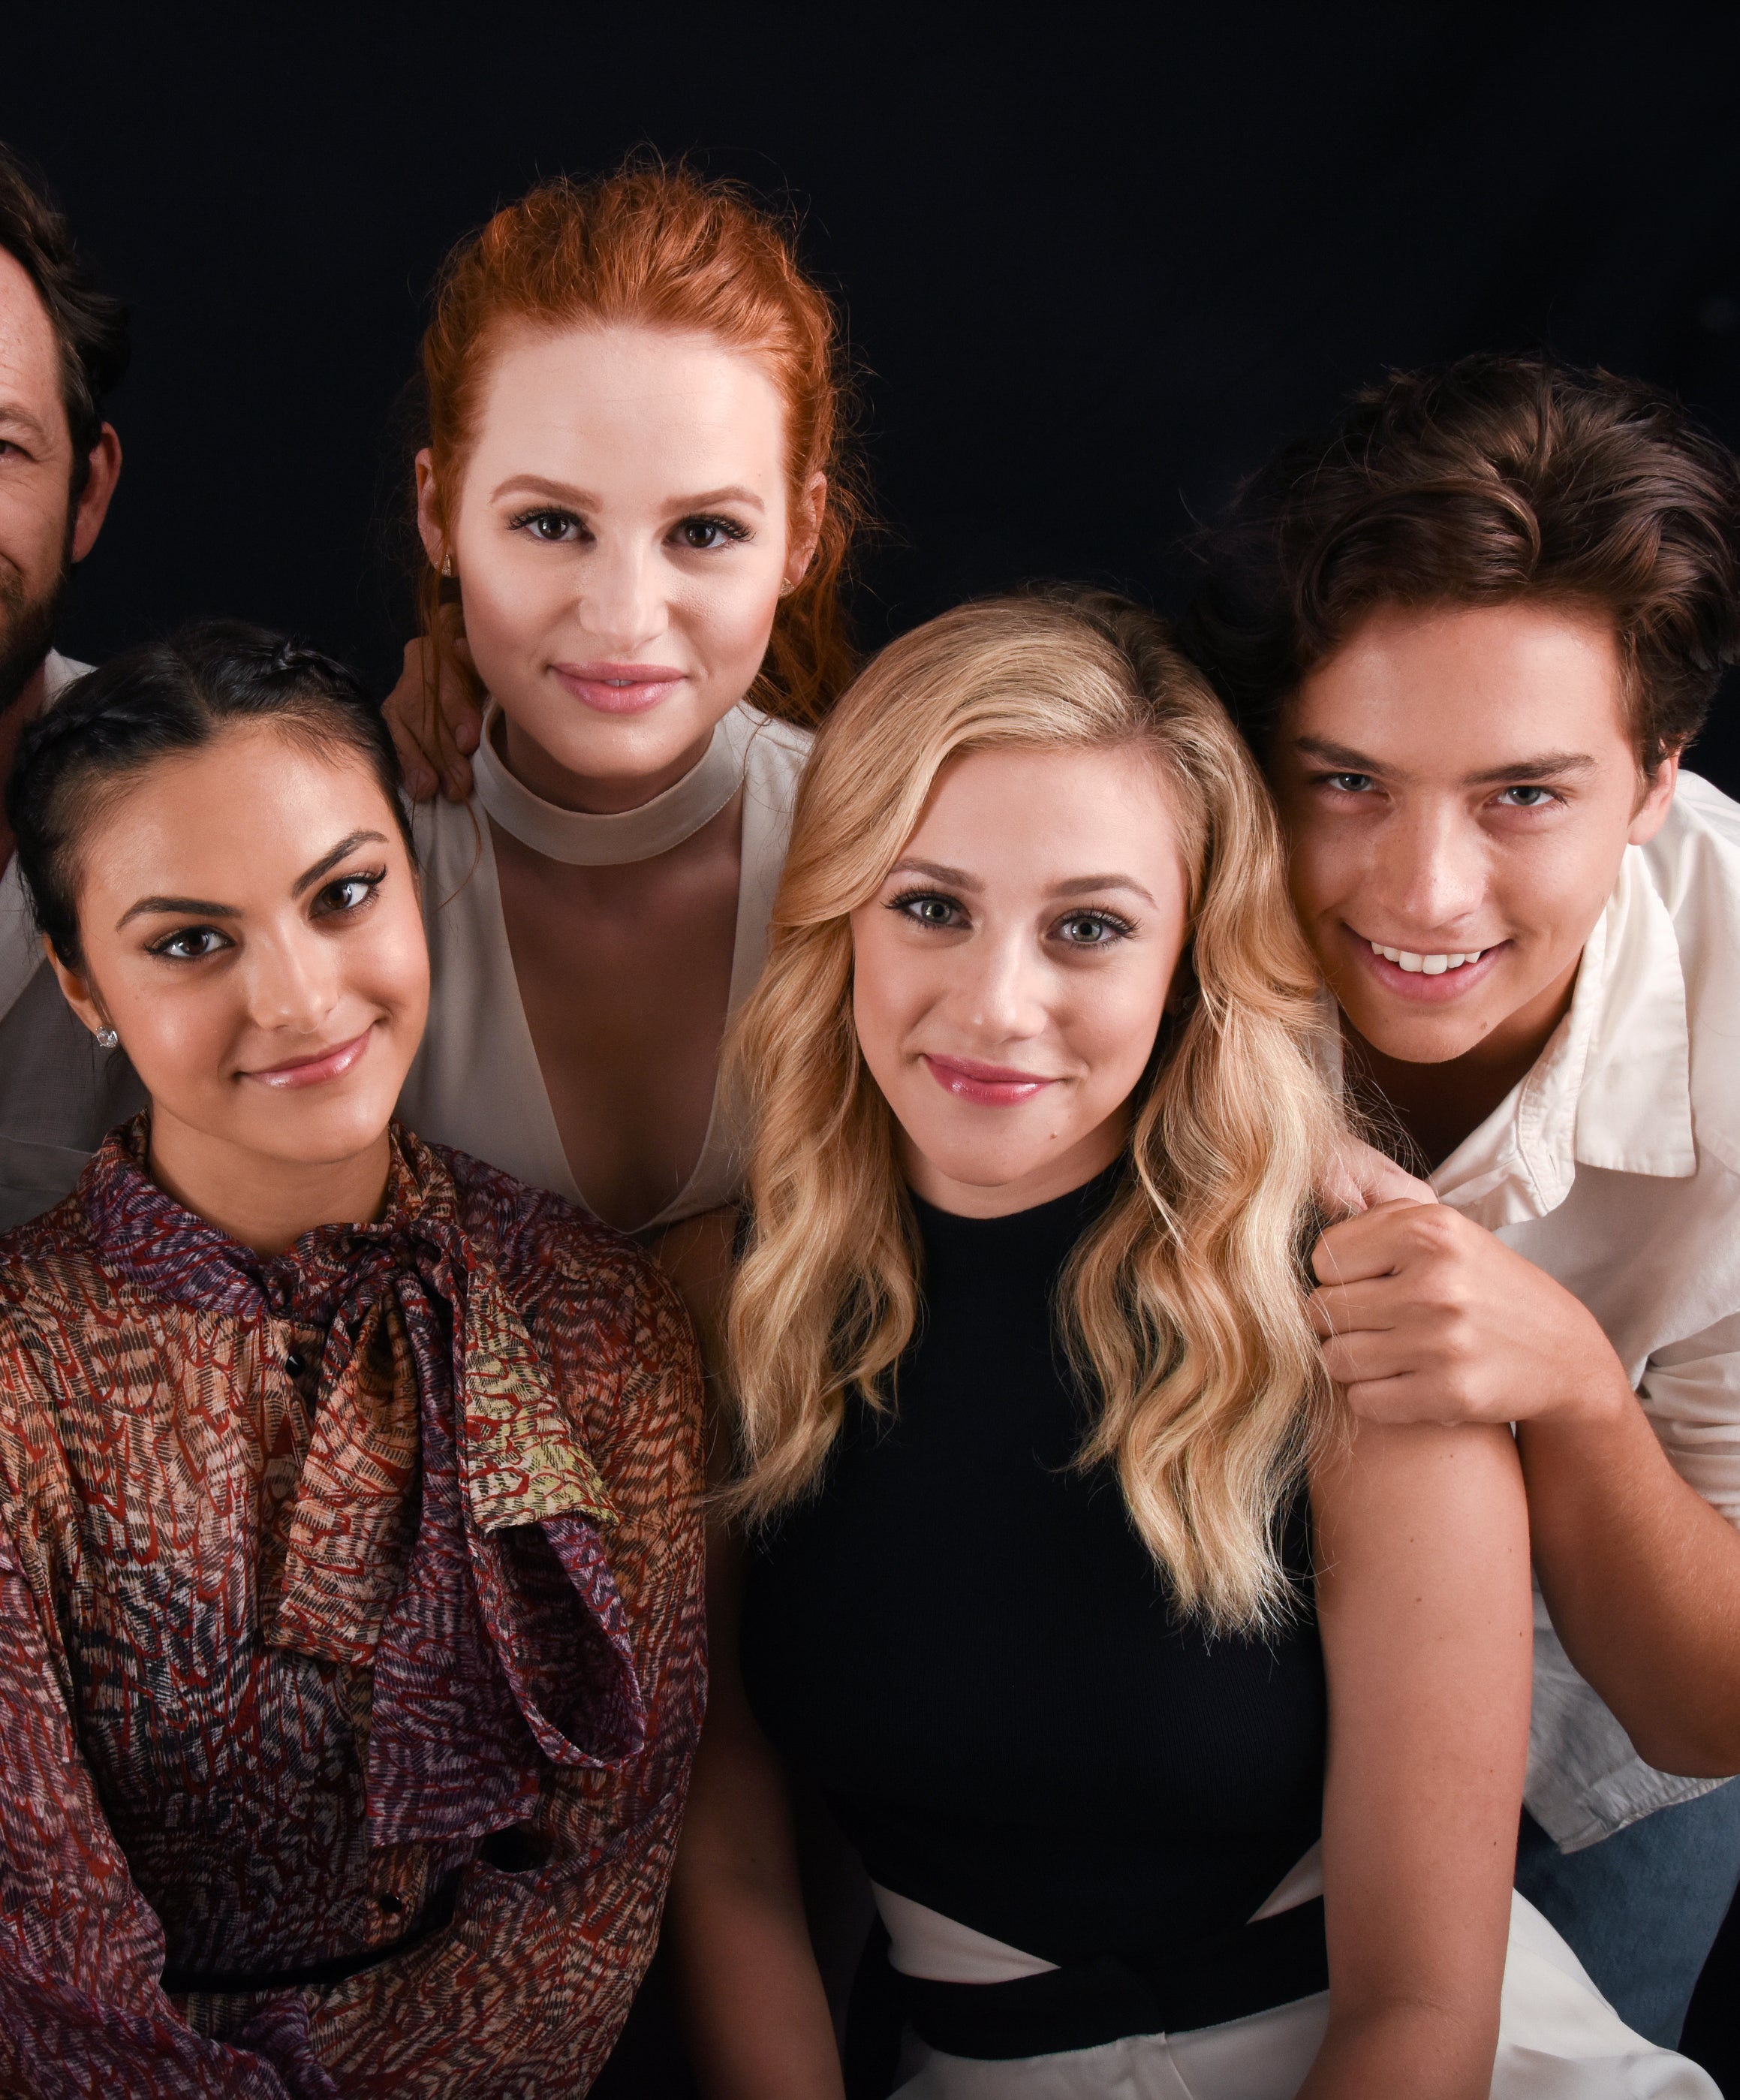 Close-up of the cast members smiling